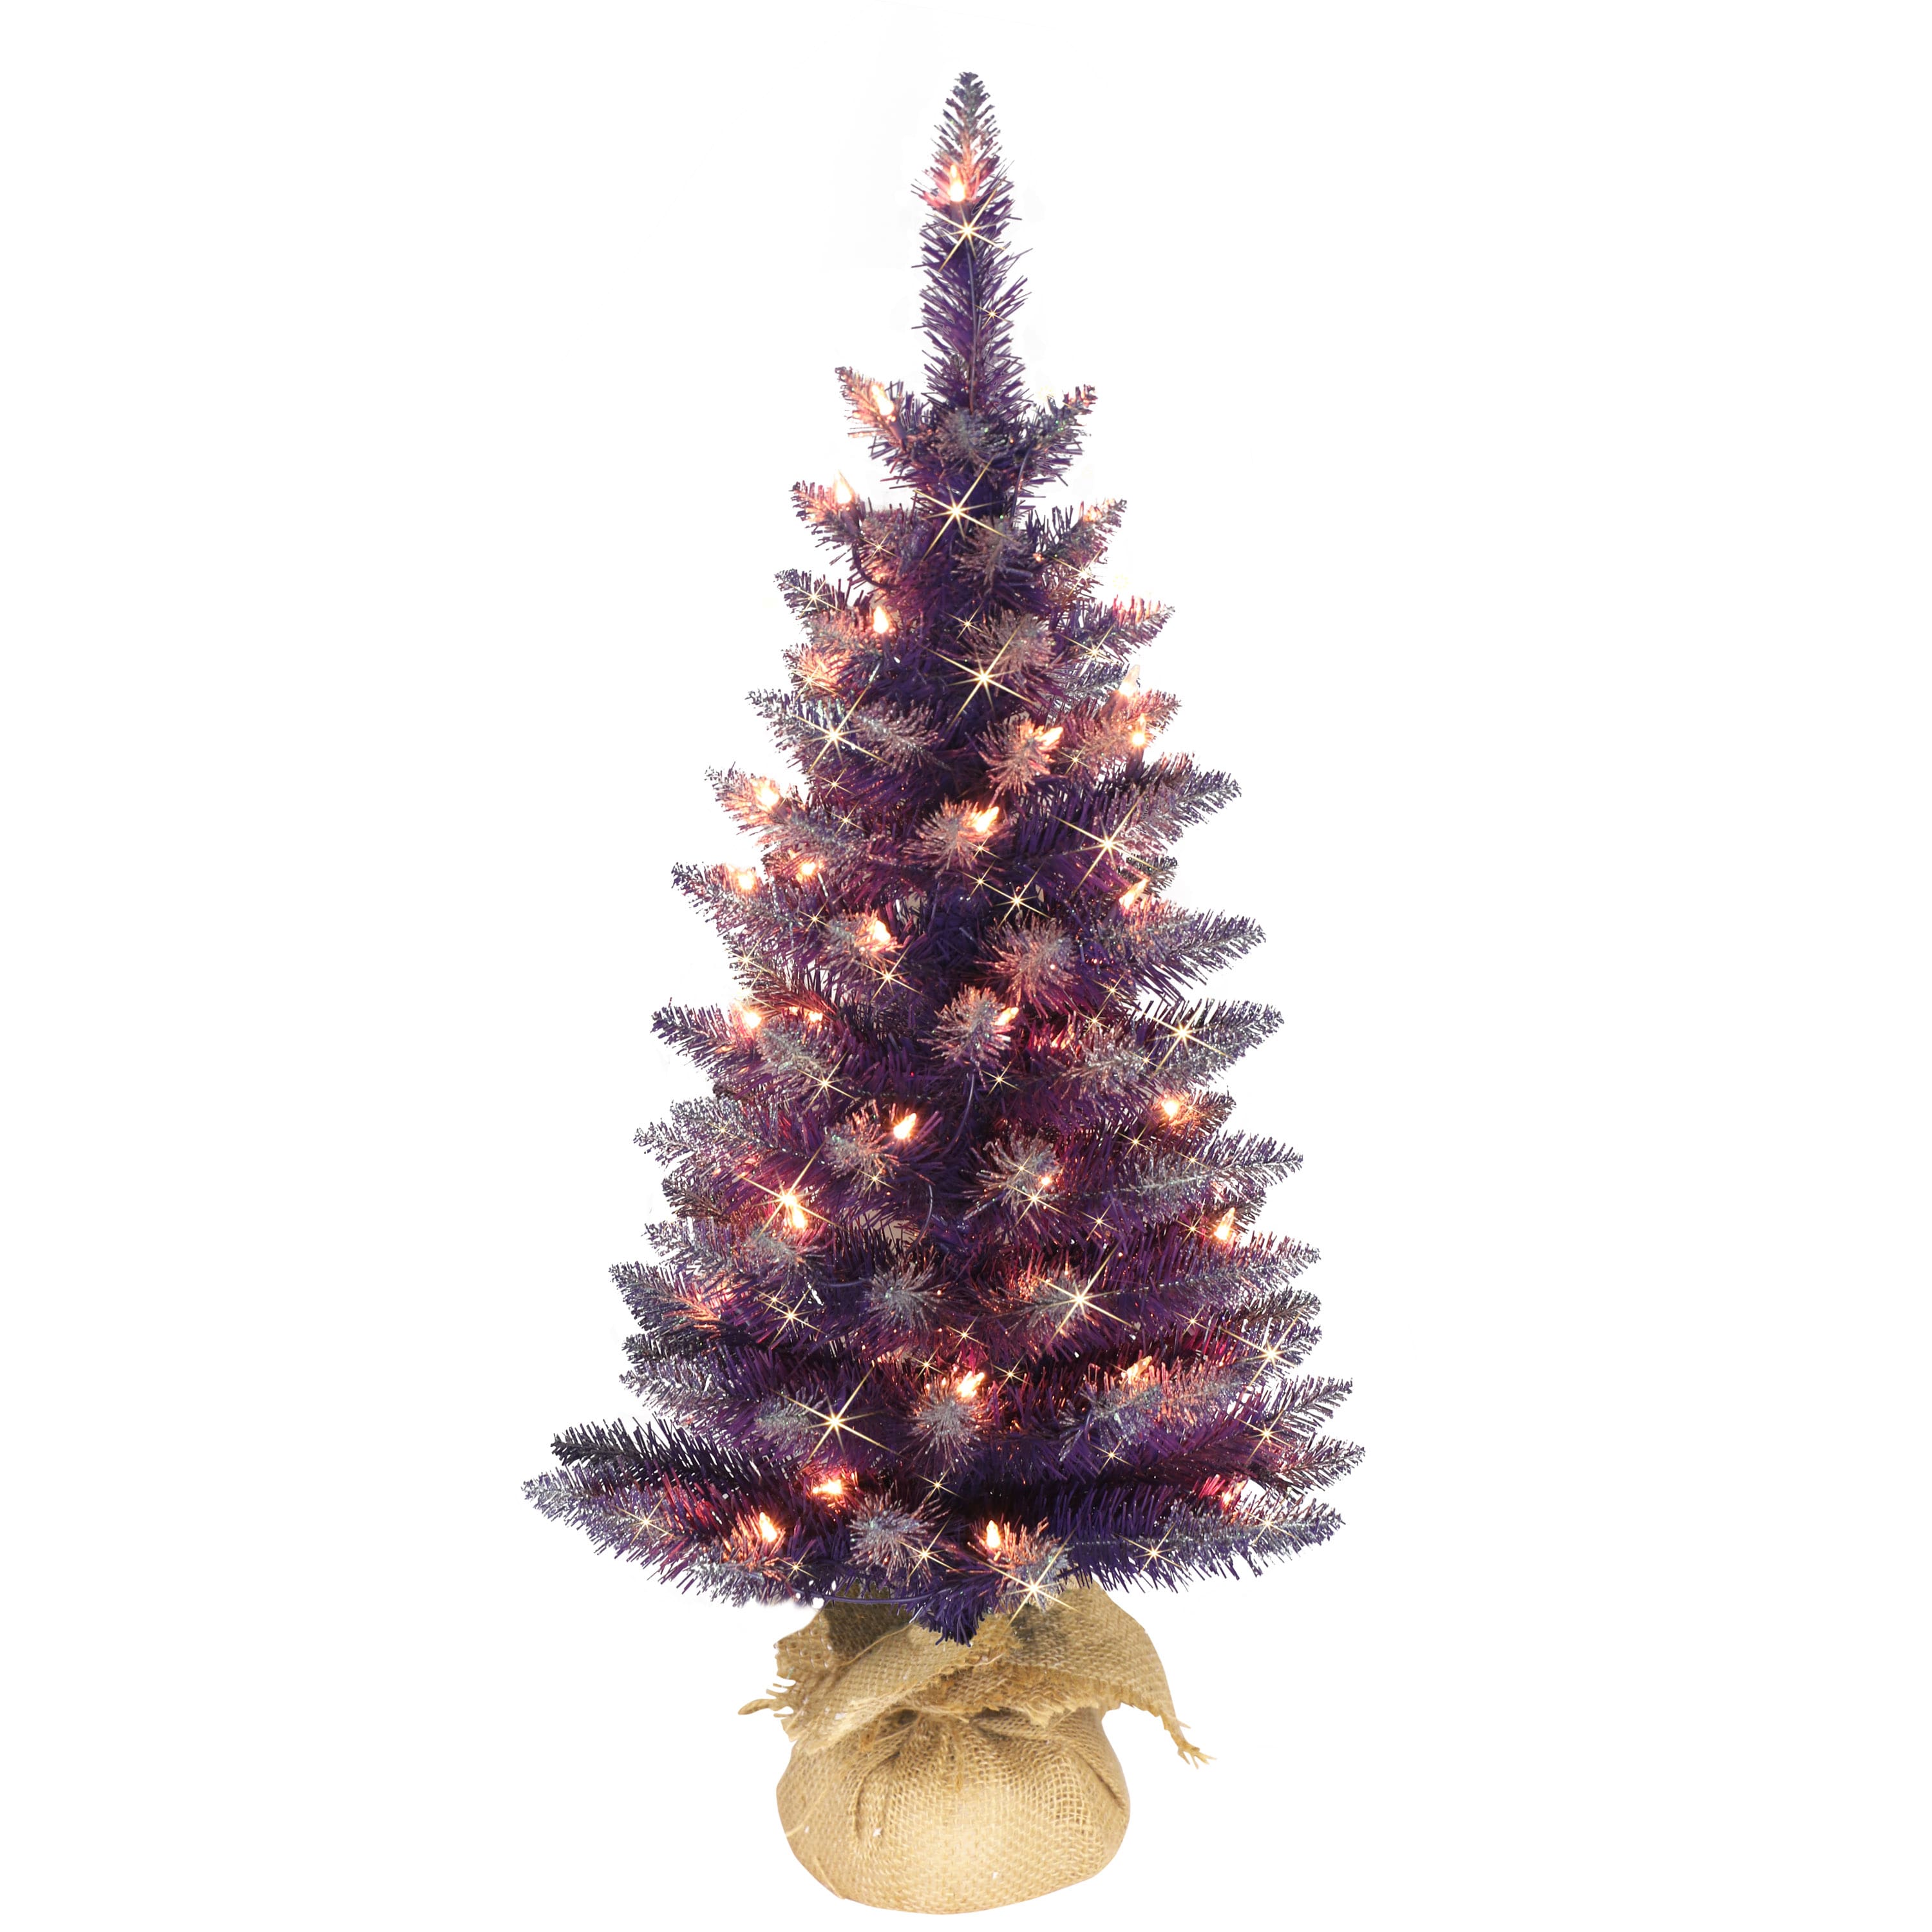 6 Pack: 3ft. Pre-Lit Flocked Purple Artificial Christmas Tree in Burlap Base, Clear Lights